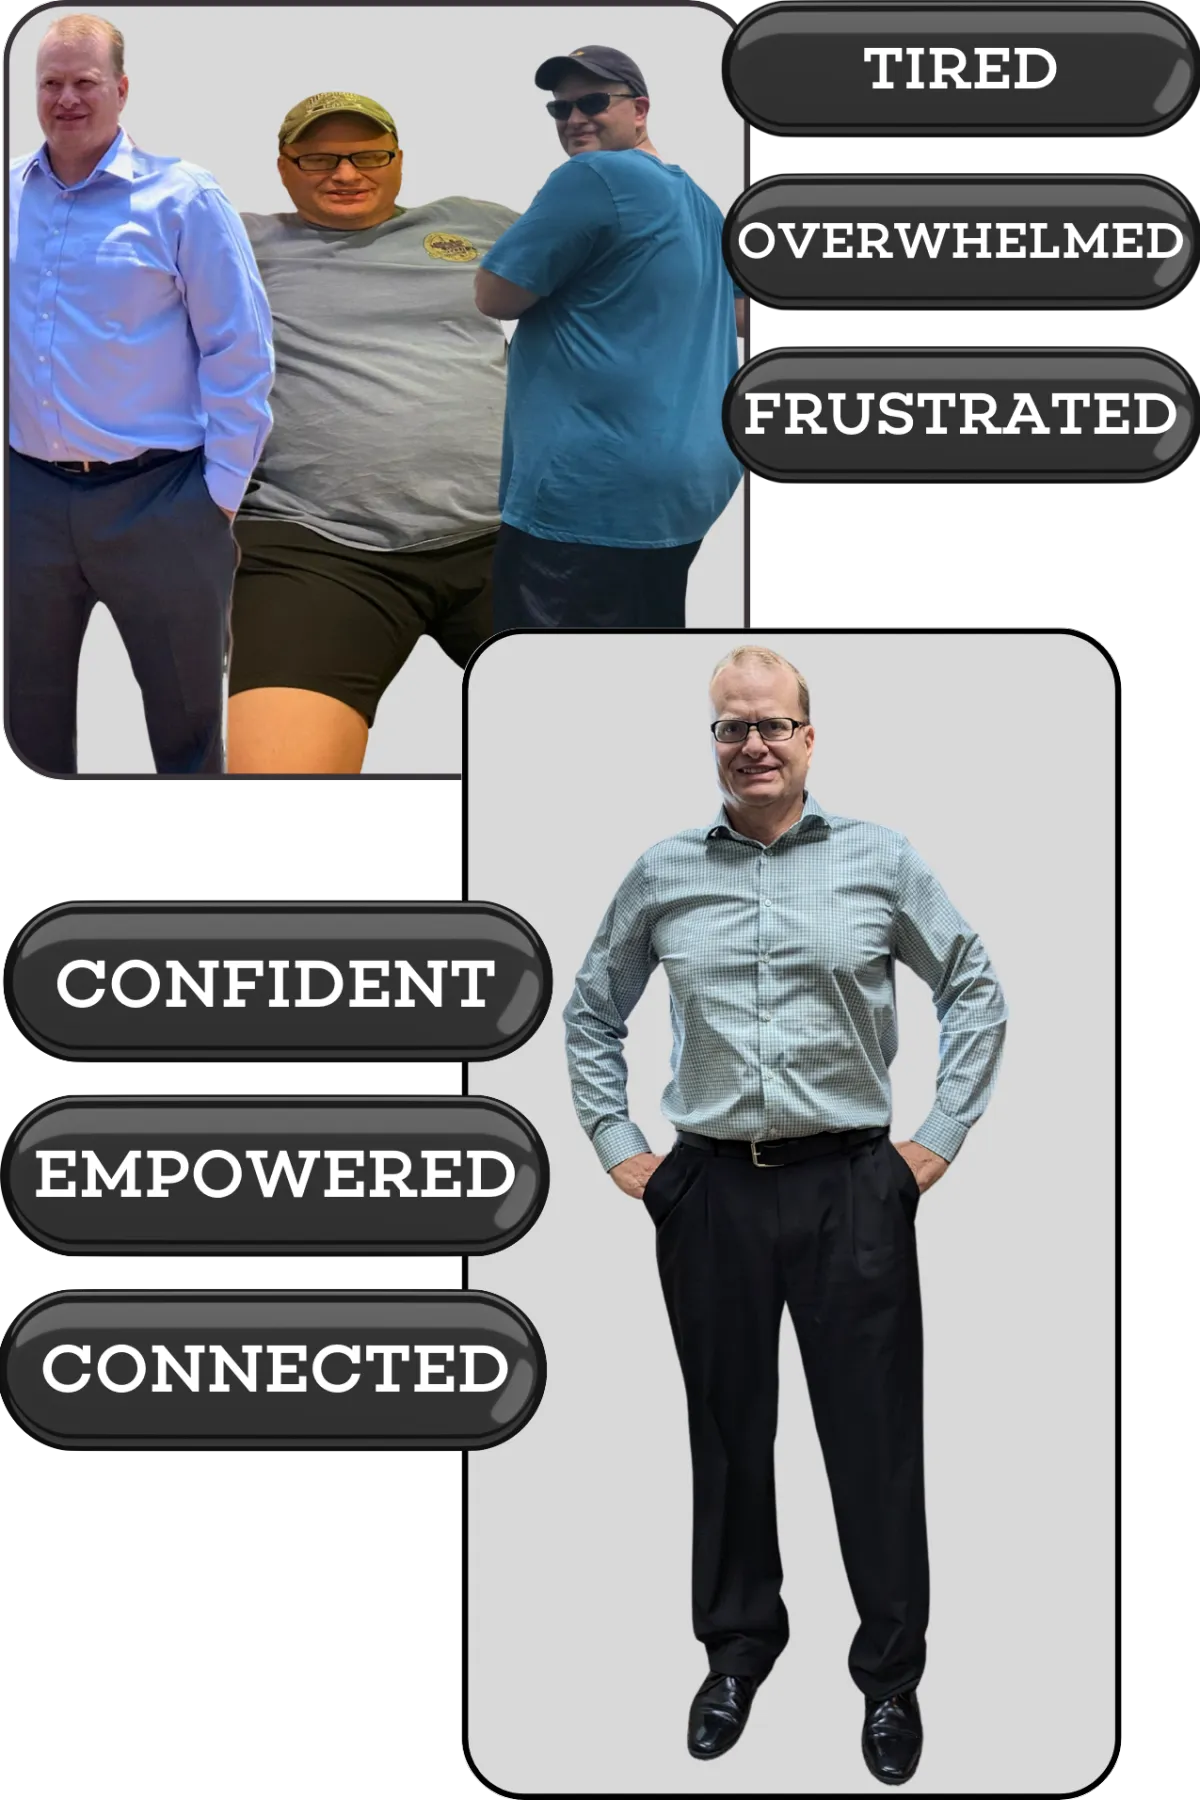 Before and after image depicting a man's journey from being overwhelmed by obesity to losing 75 pounds and maintaining the weight loss for over a year, showcasing his newfound confidence, empowerment, and connection to his health transformation.